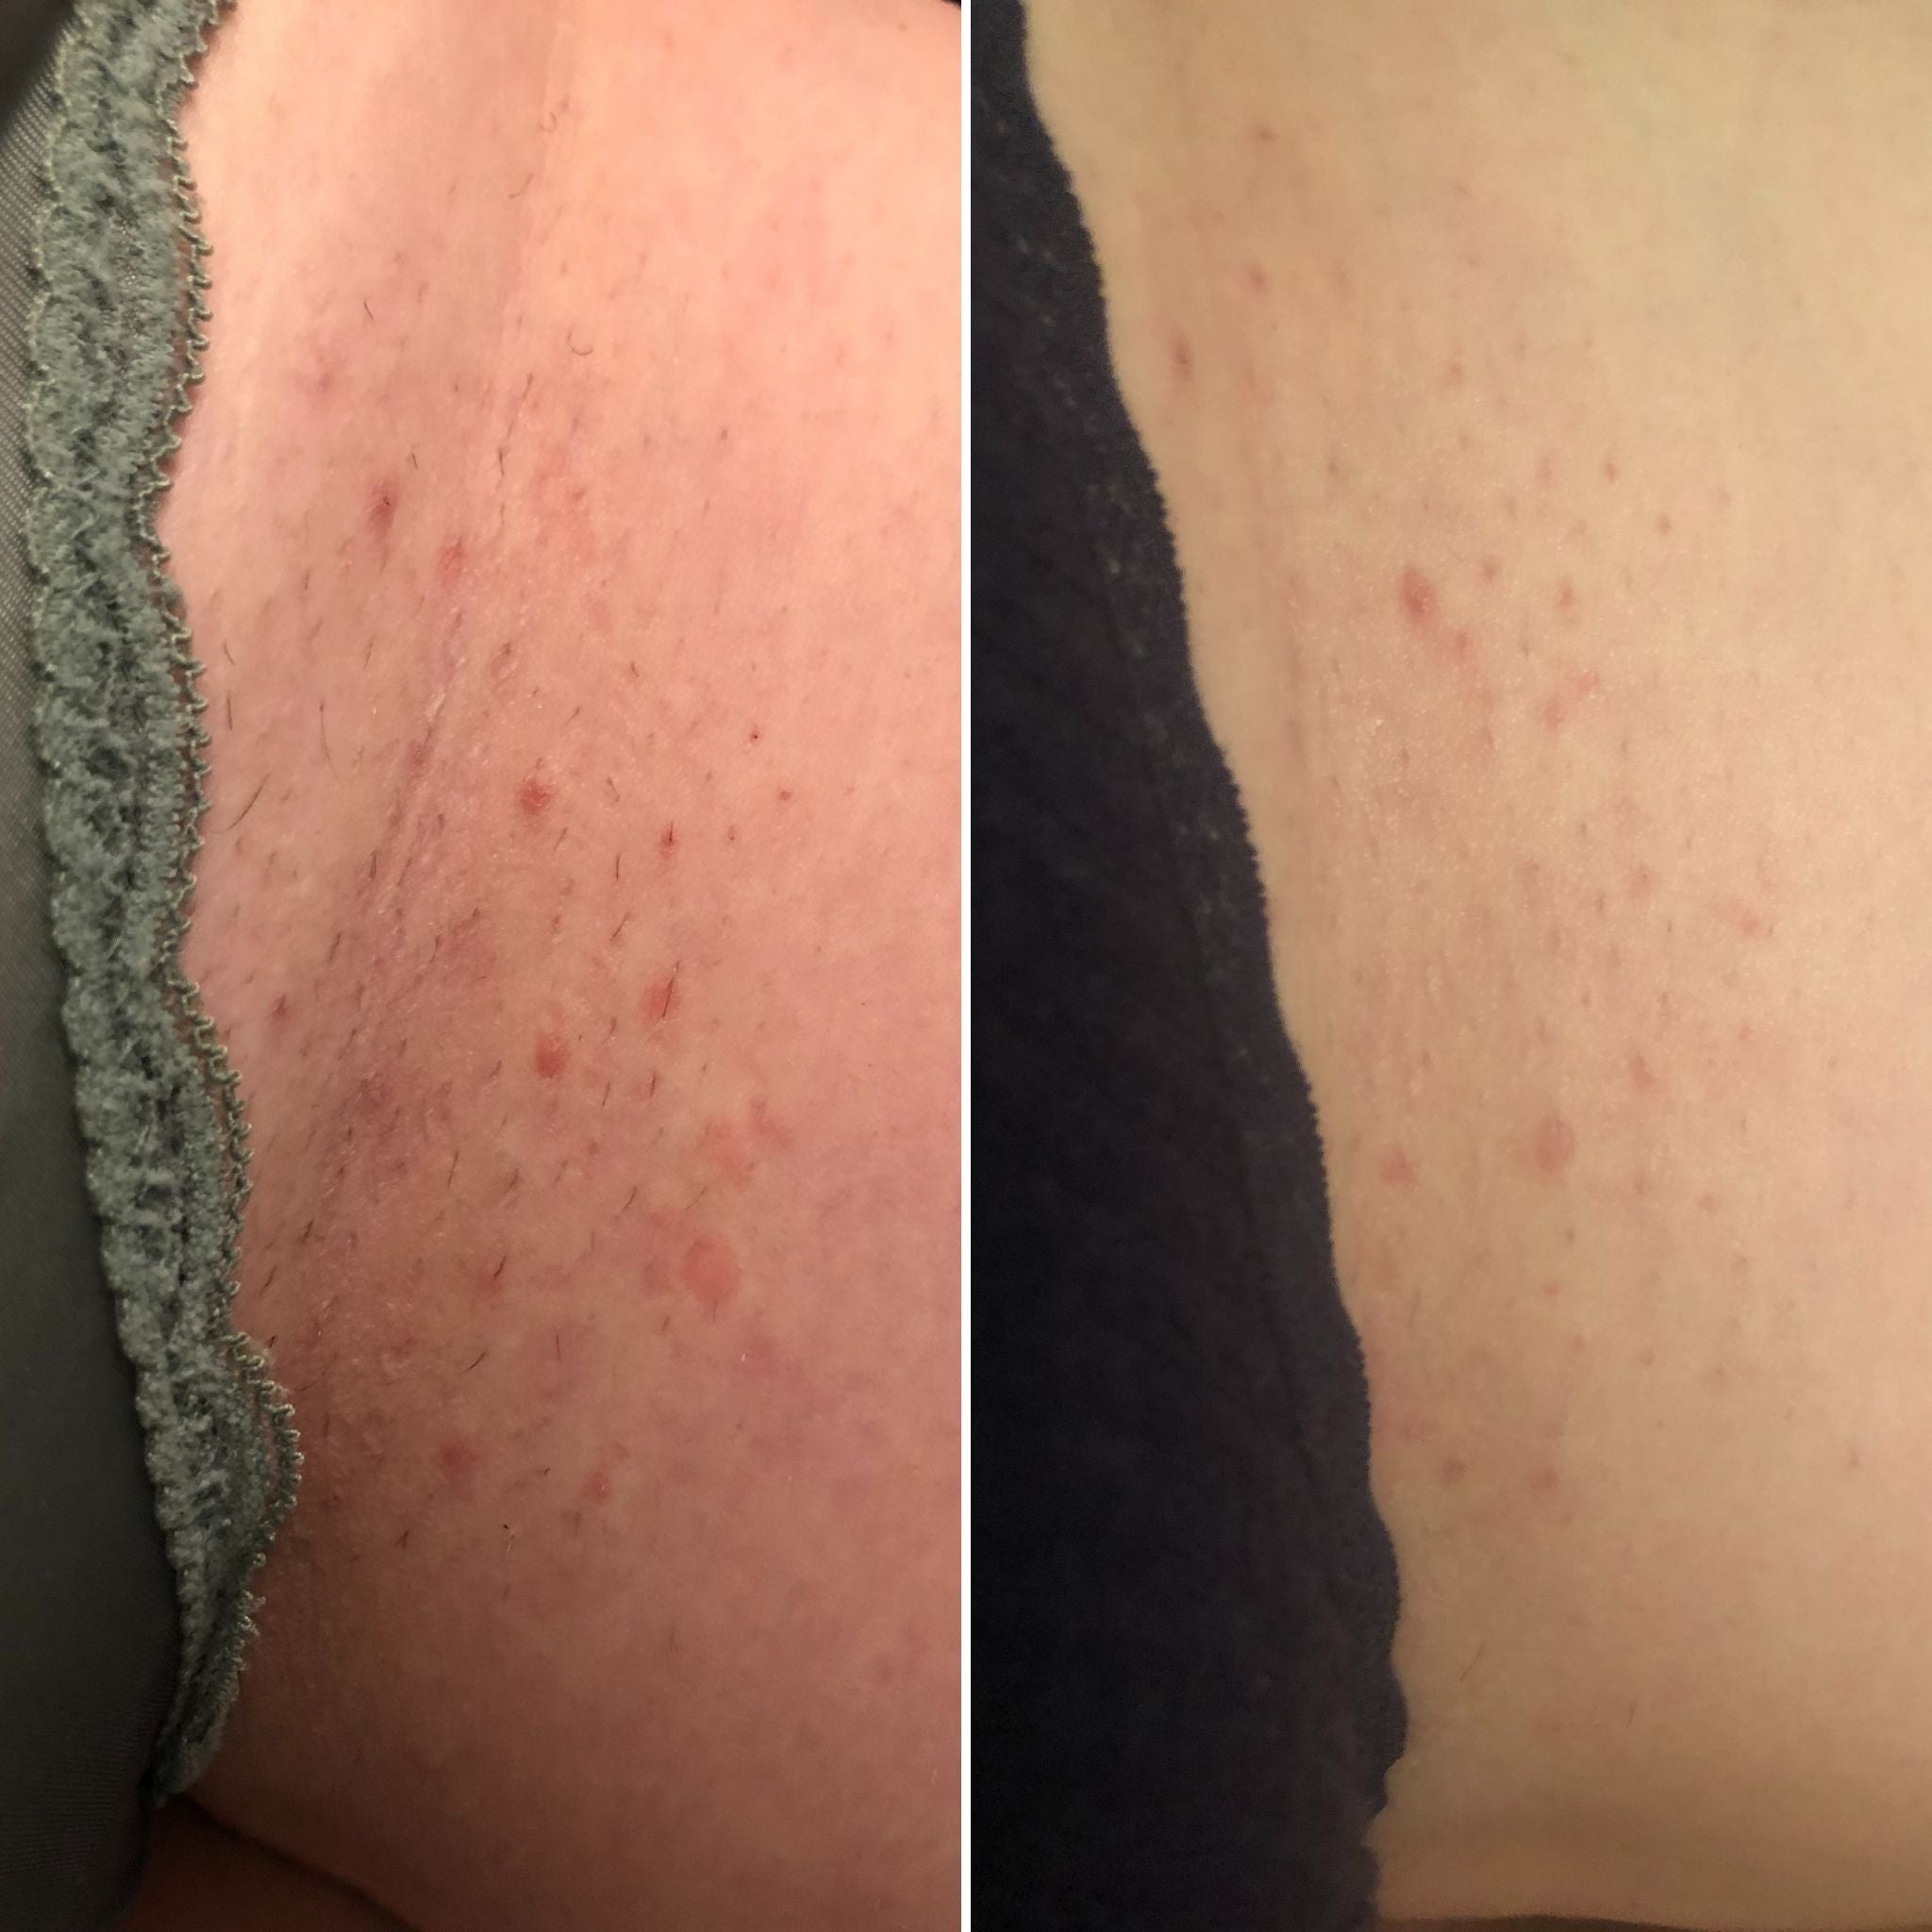 Before and After Bushbalm ingrown hairs